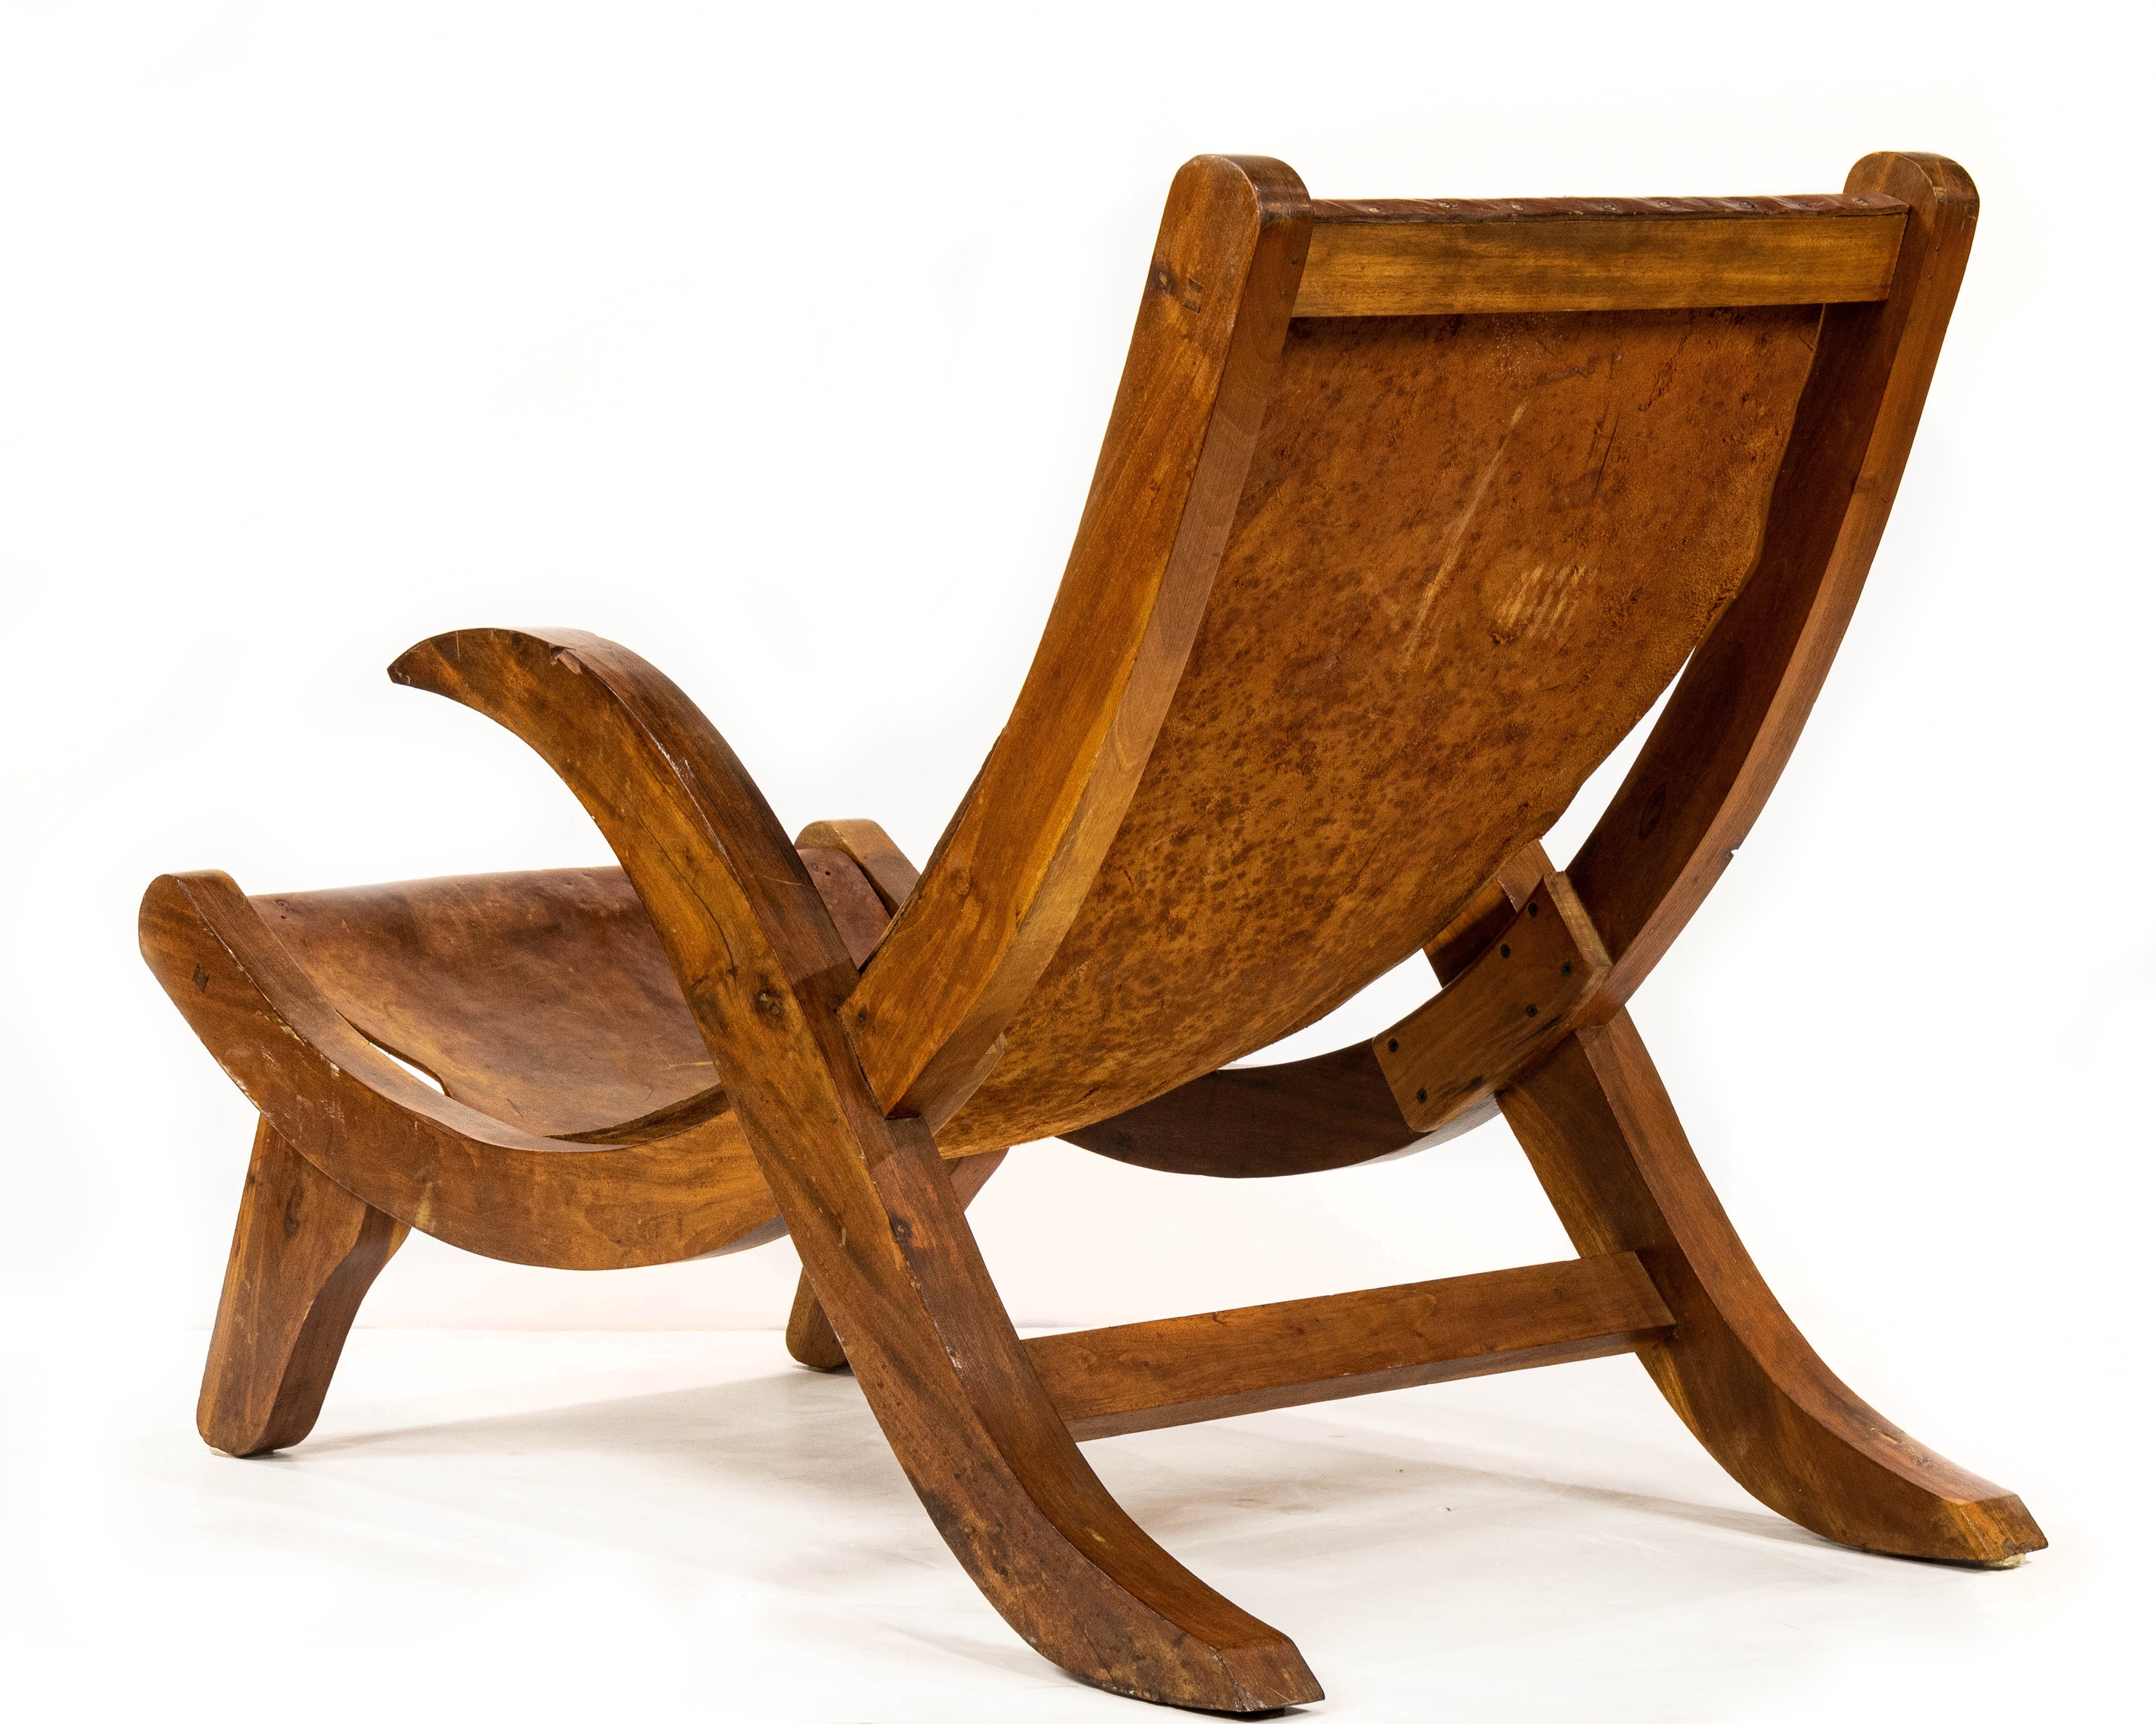 Artwork by Clara Porset, Butaque chair, Made of wood, leather